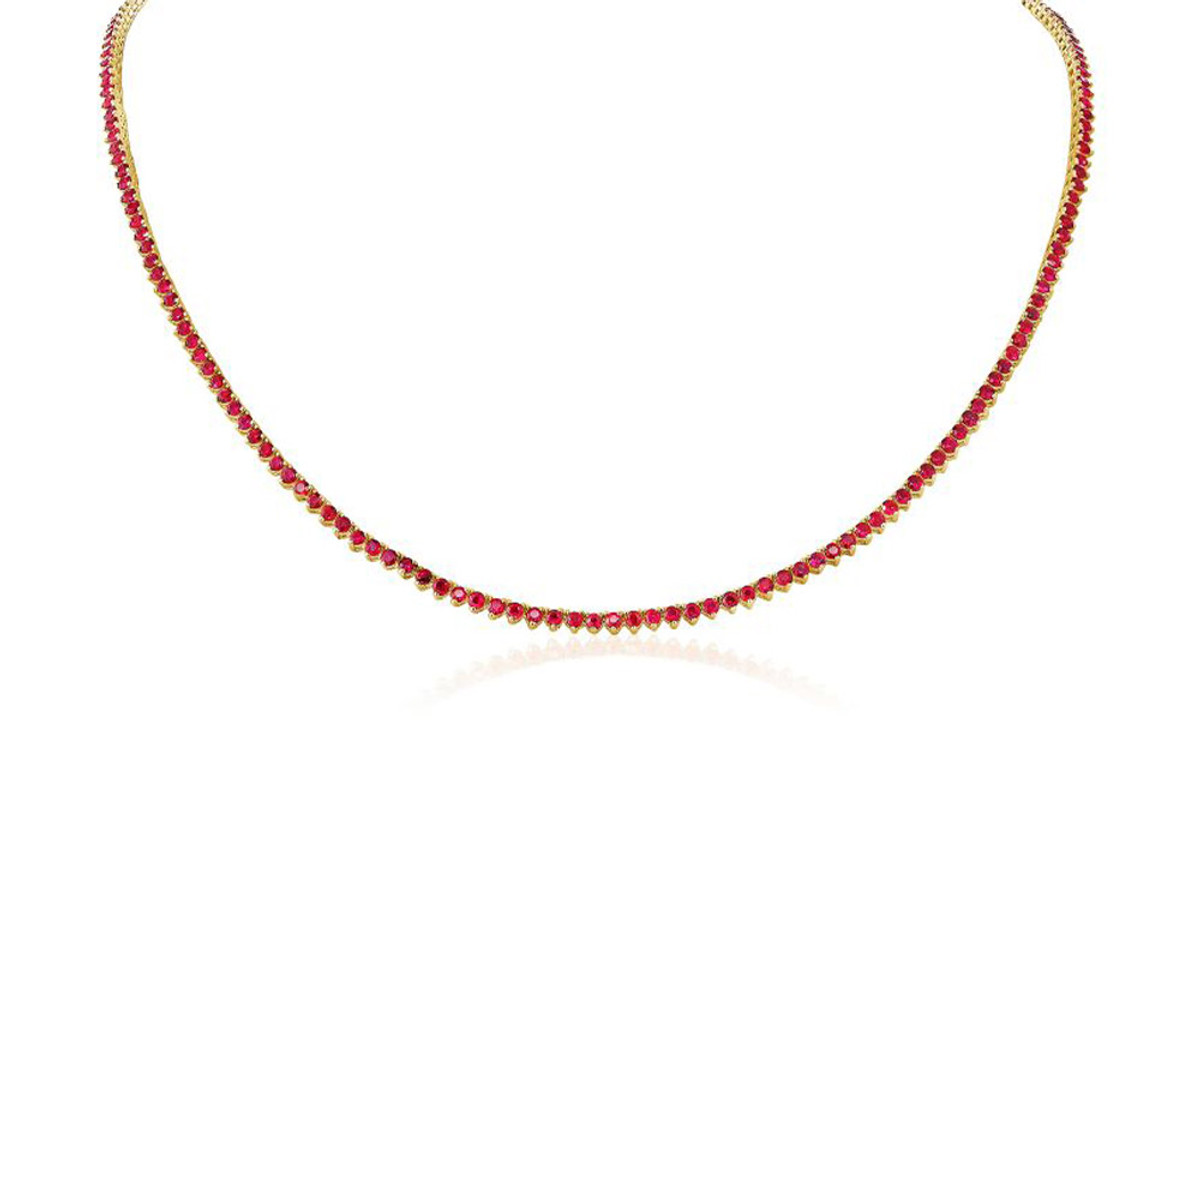 Hyde Park Collection 14K Yellow Gold Ruby Necklace-38426 Product Image